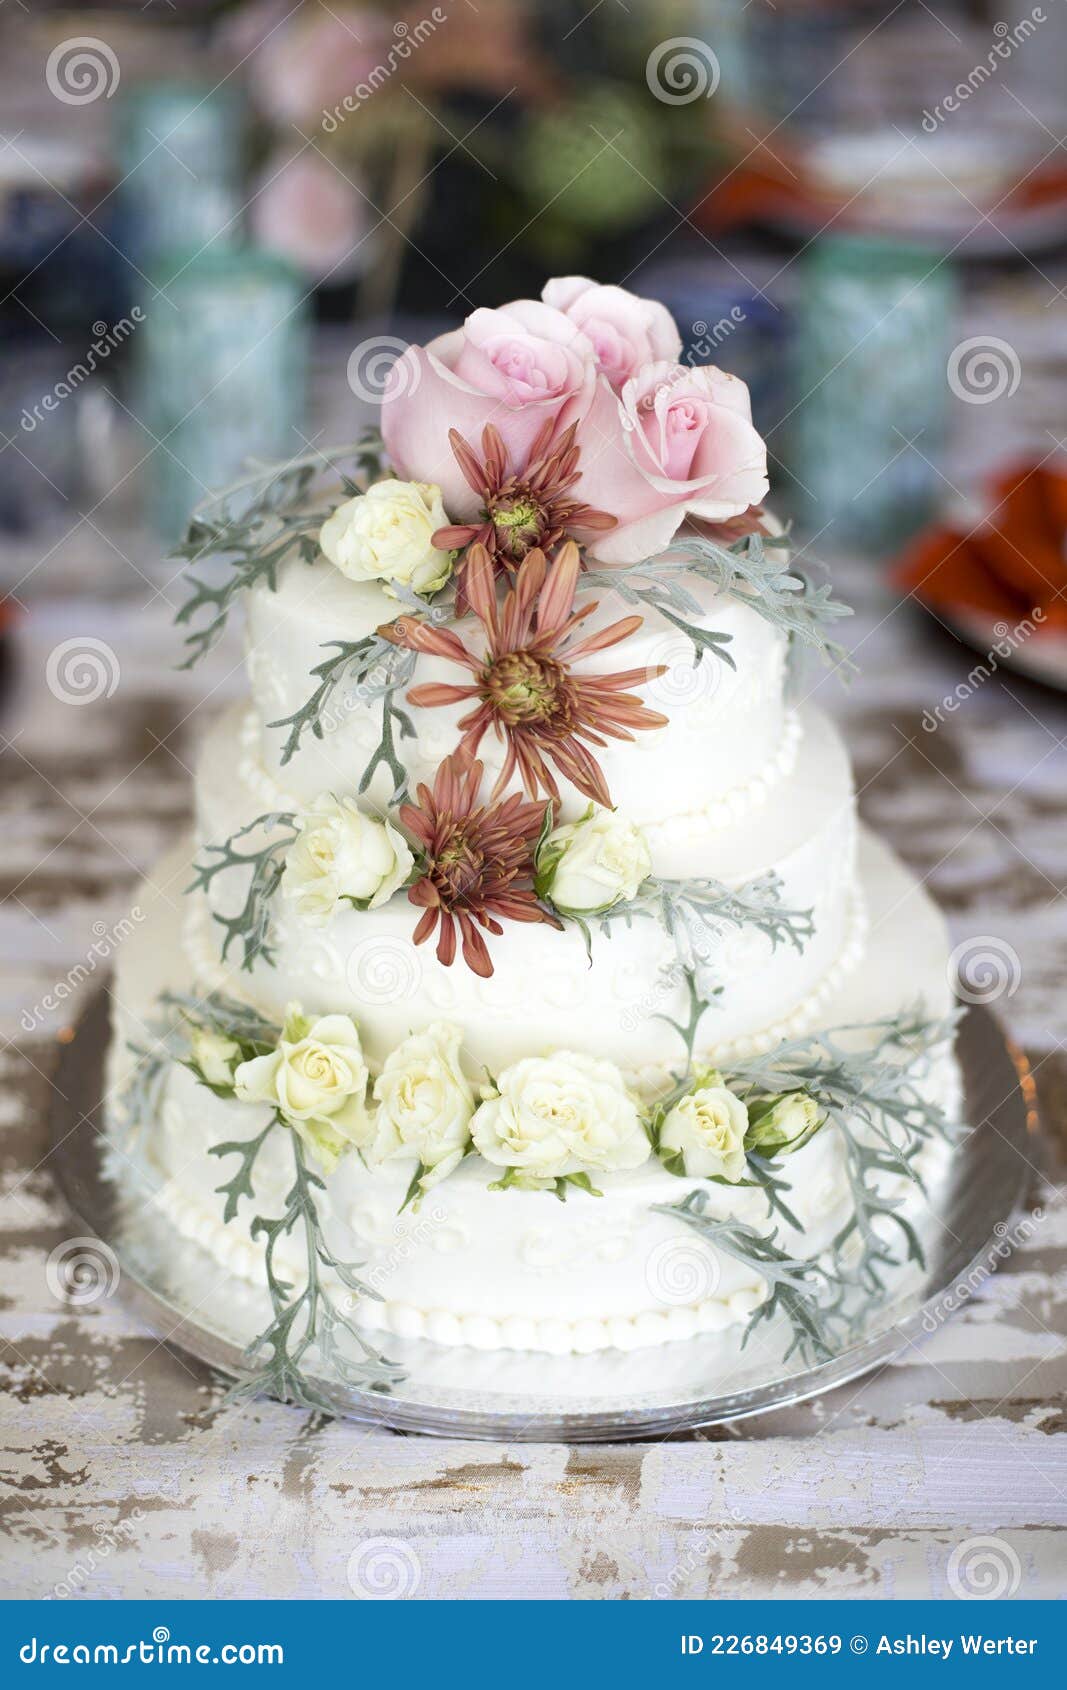 a beautiful and delicious wedding cake.